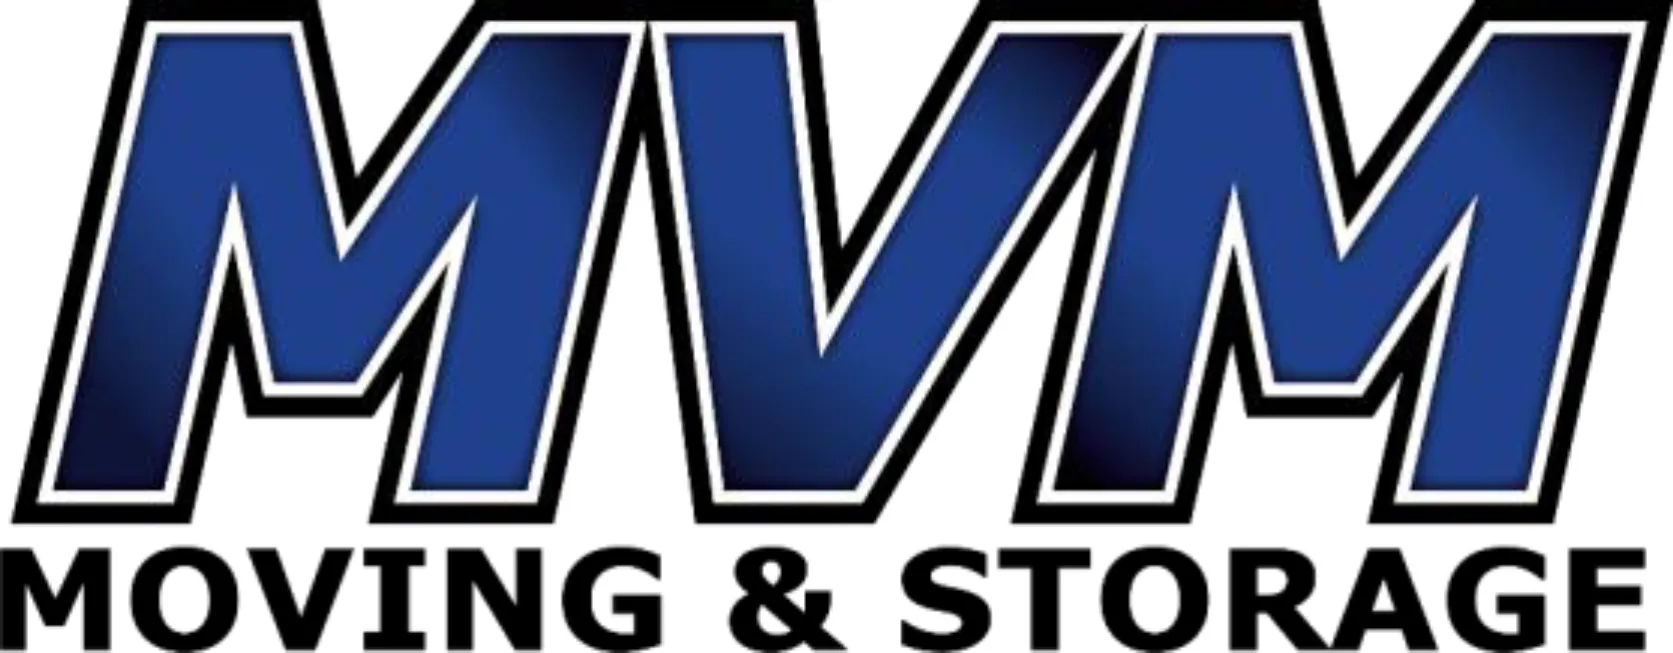 MVM Moving & Storage - Formerly Maumee Valley Movers Logo